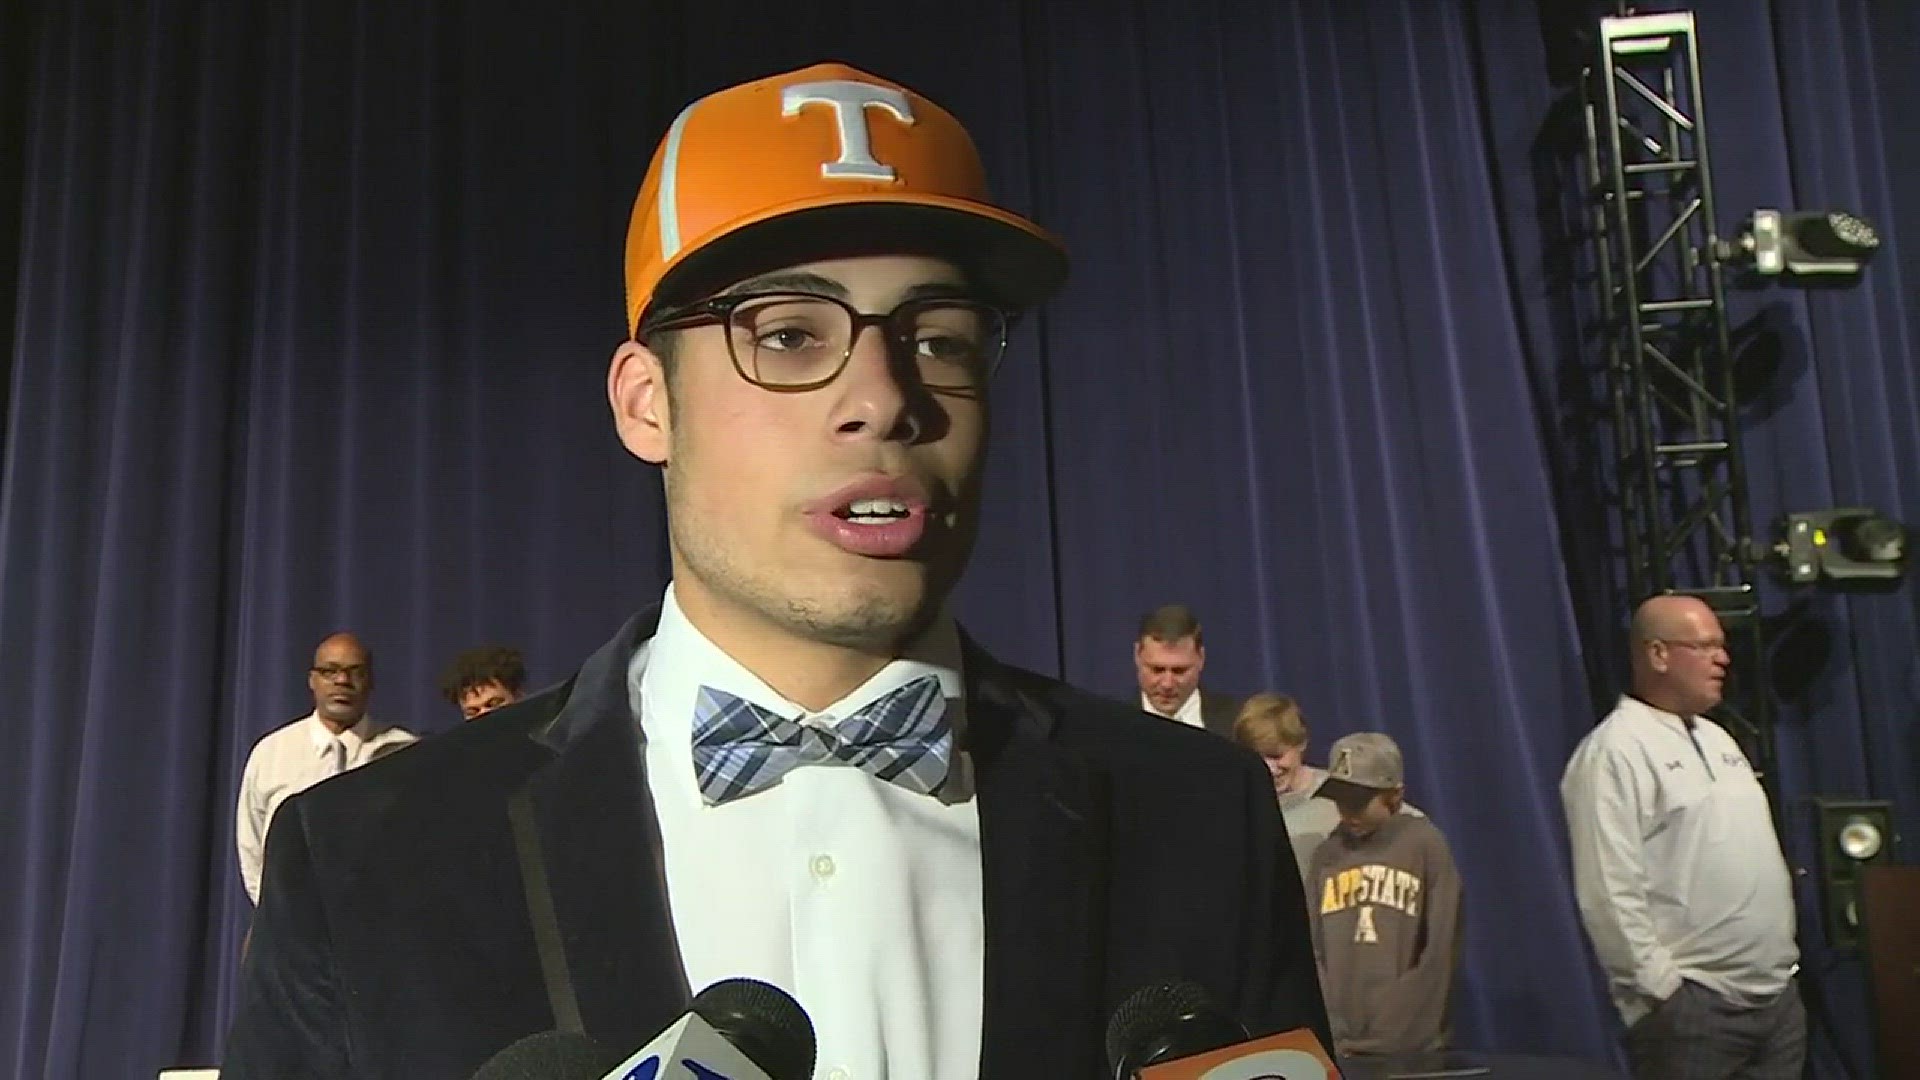 Jacob Warren has wanted to be a Vol since he was a little kid and he just made it a reality, signing with Tennessee on the first day of the early signing period.